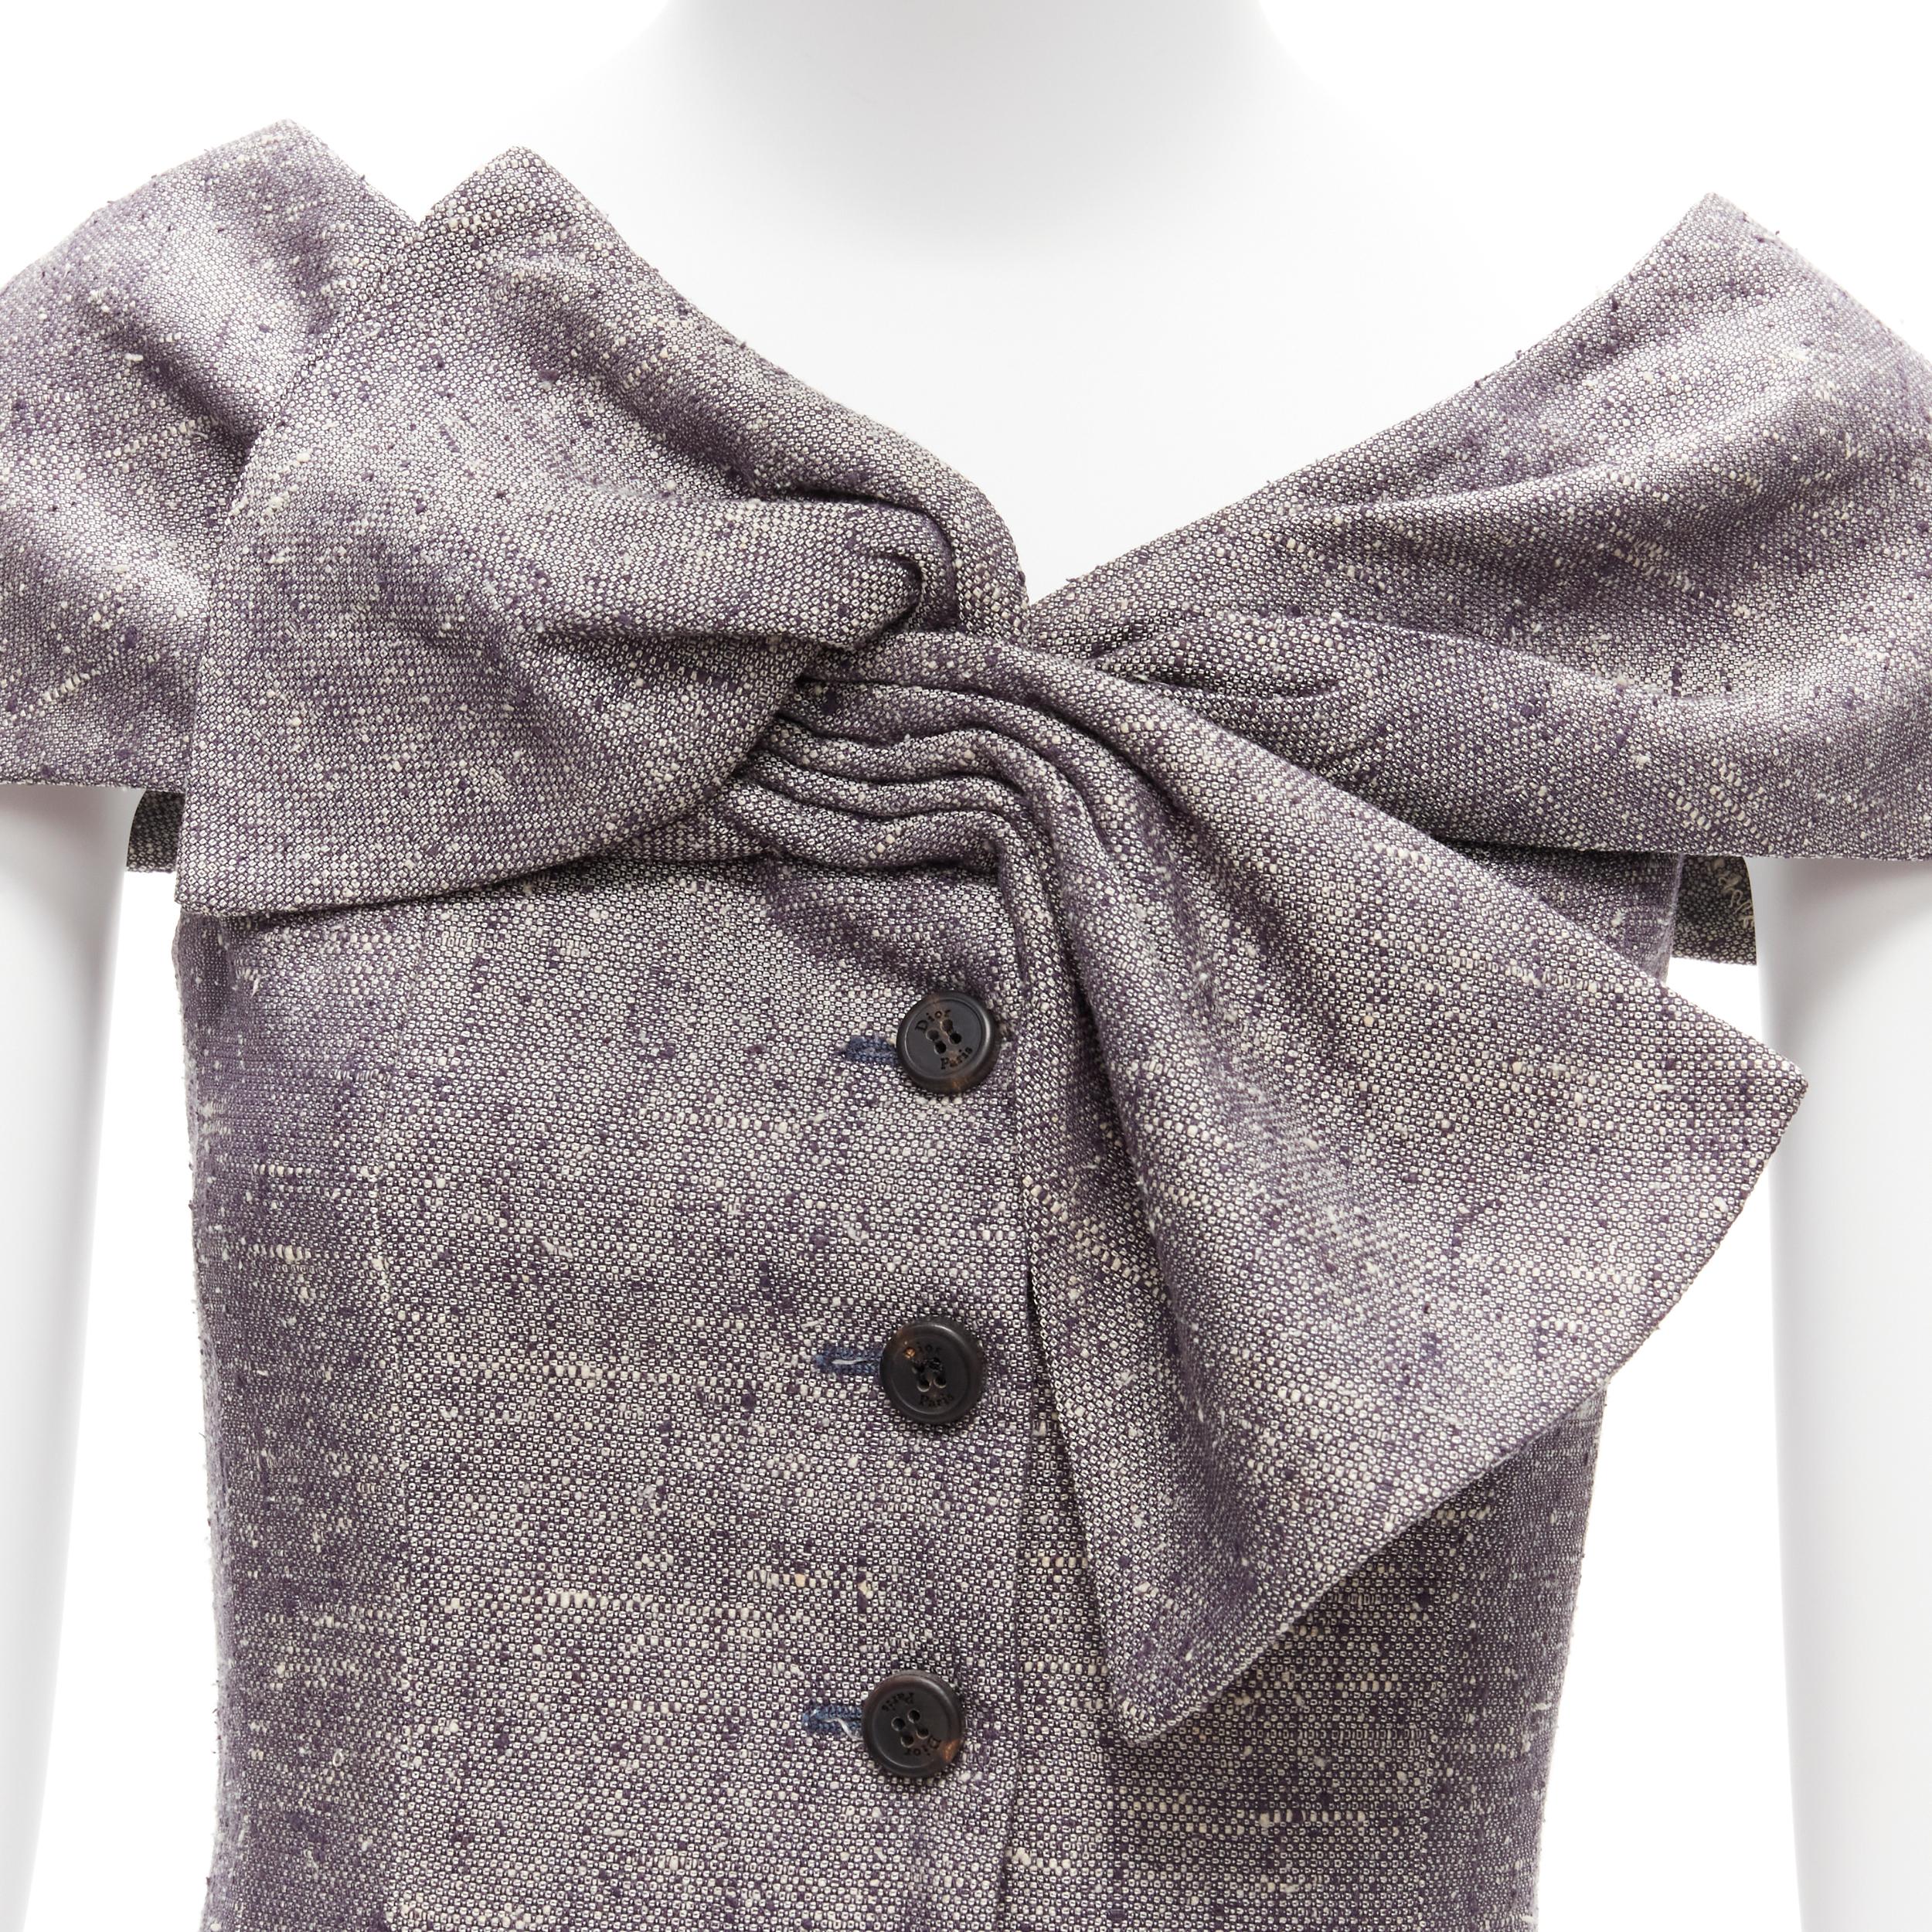 CHRISTIAN DIOR Galliano Vintage grey boucle bow detail fitted jacket FR34 XS
Reference: TGAS/C02038
Brand: Christian Dior
Designer: John Galliano
Material: Silk
Color: Grey, White
Pattern: Solid
Closure: Button
Lining: Beige Silk
Made in: